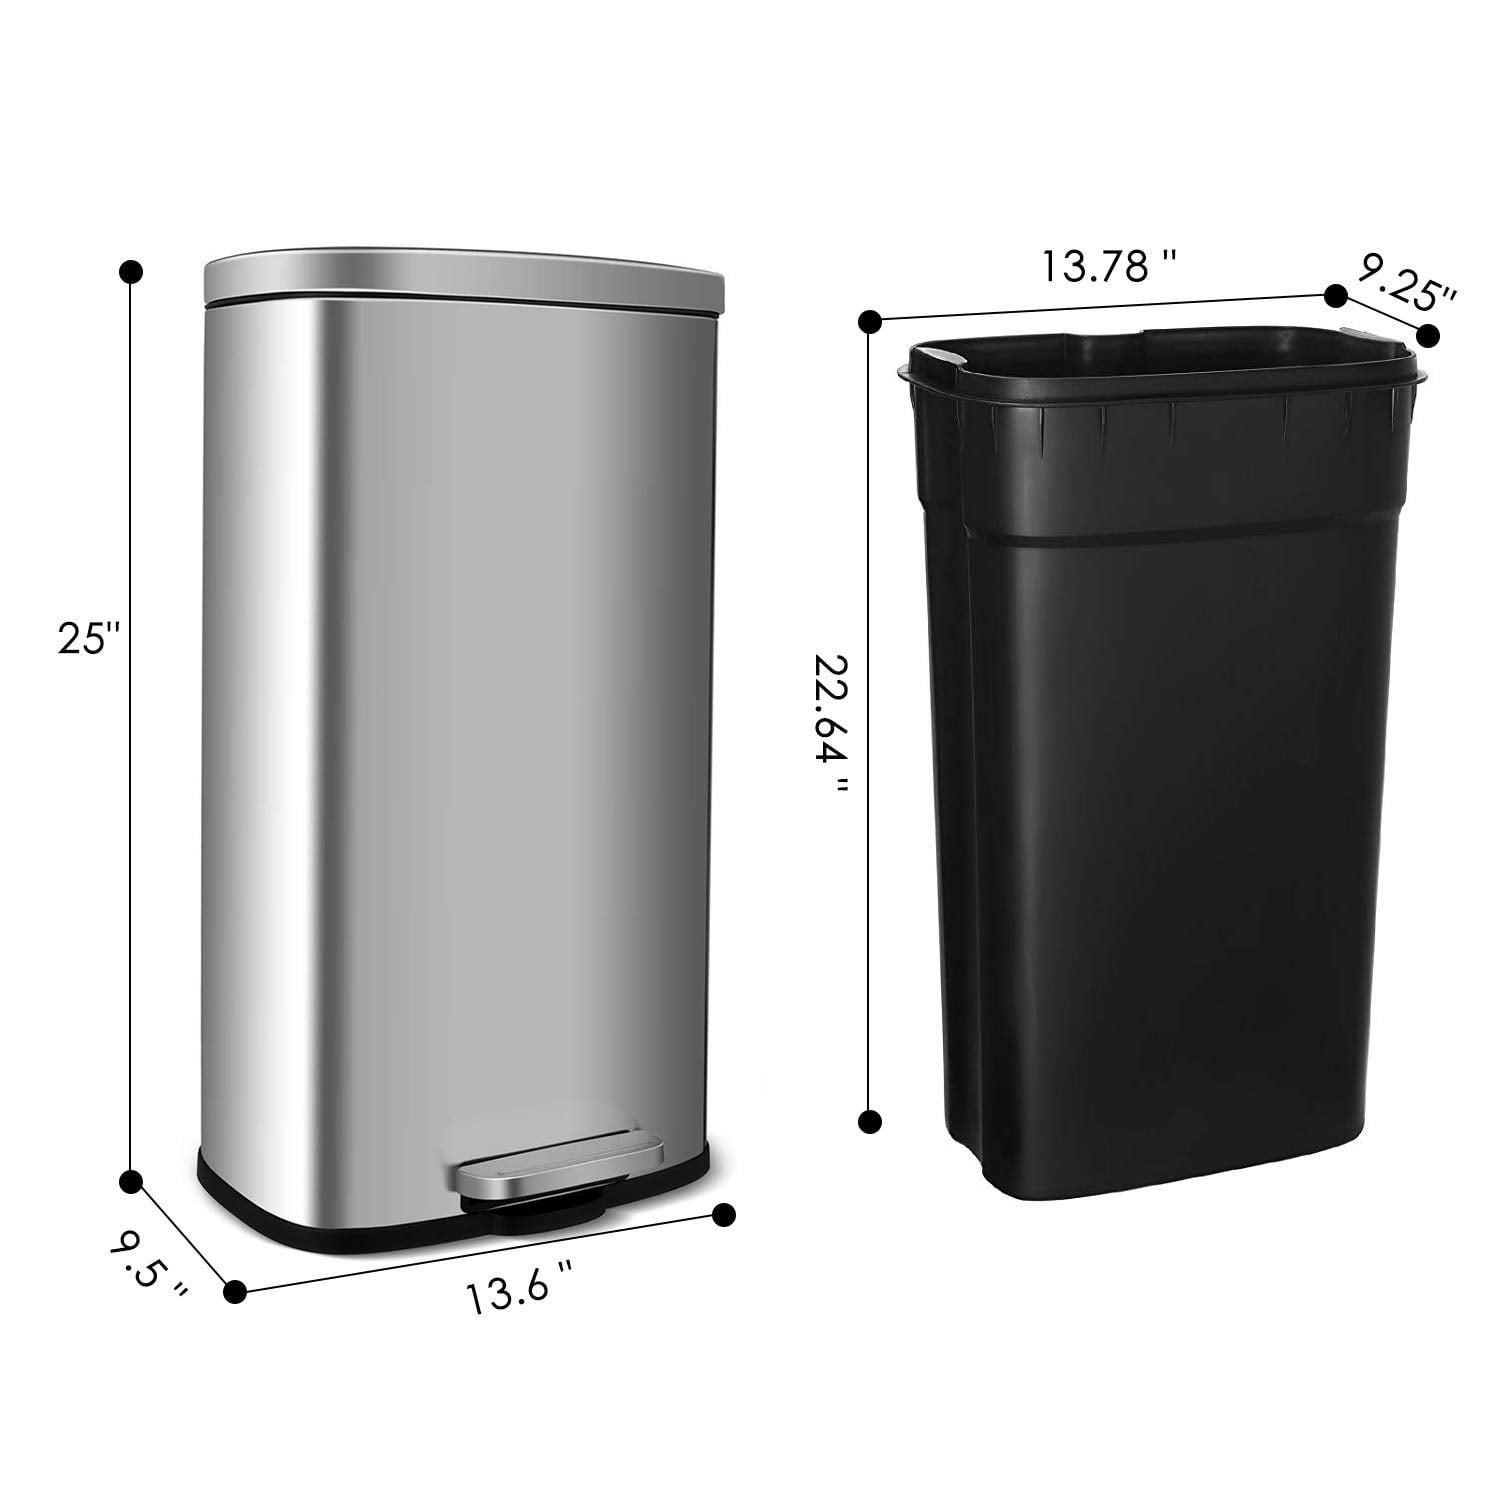 LAZY BUDDY 30 Liter 8 Gallon Trash Can with Foot Pedal, Stainless Steel  Kitchen Garbage Can with Lid, Home Office Wastebasket